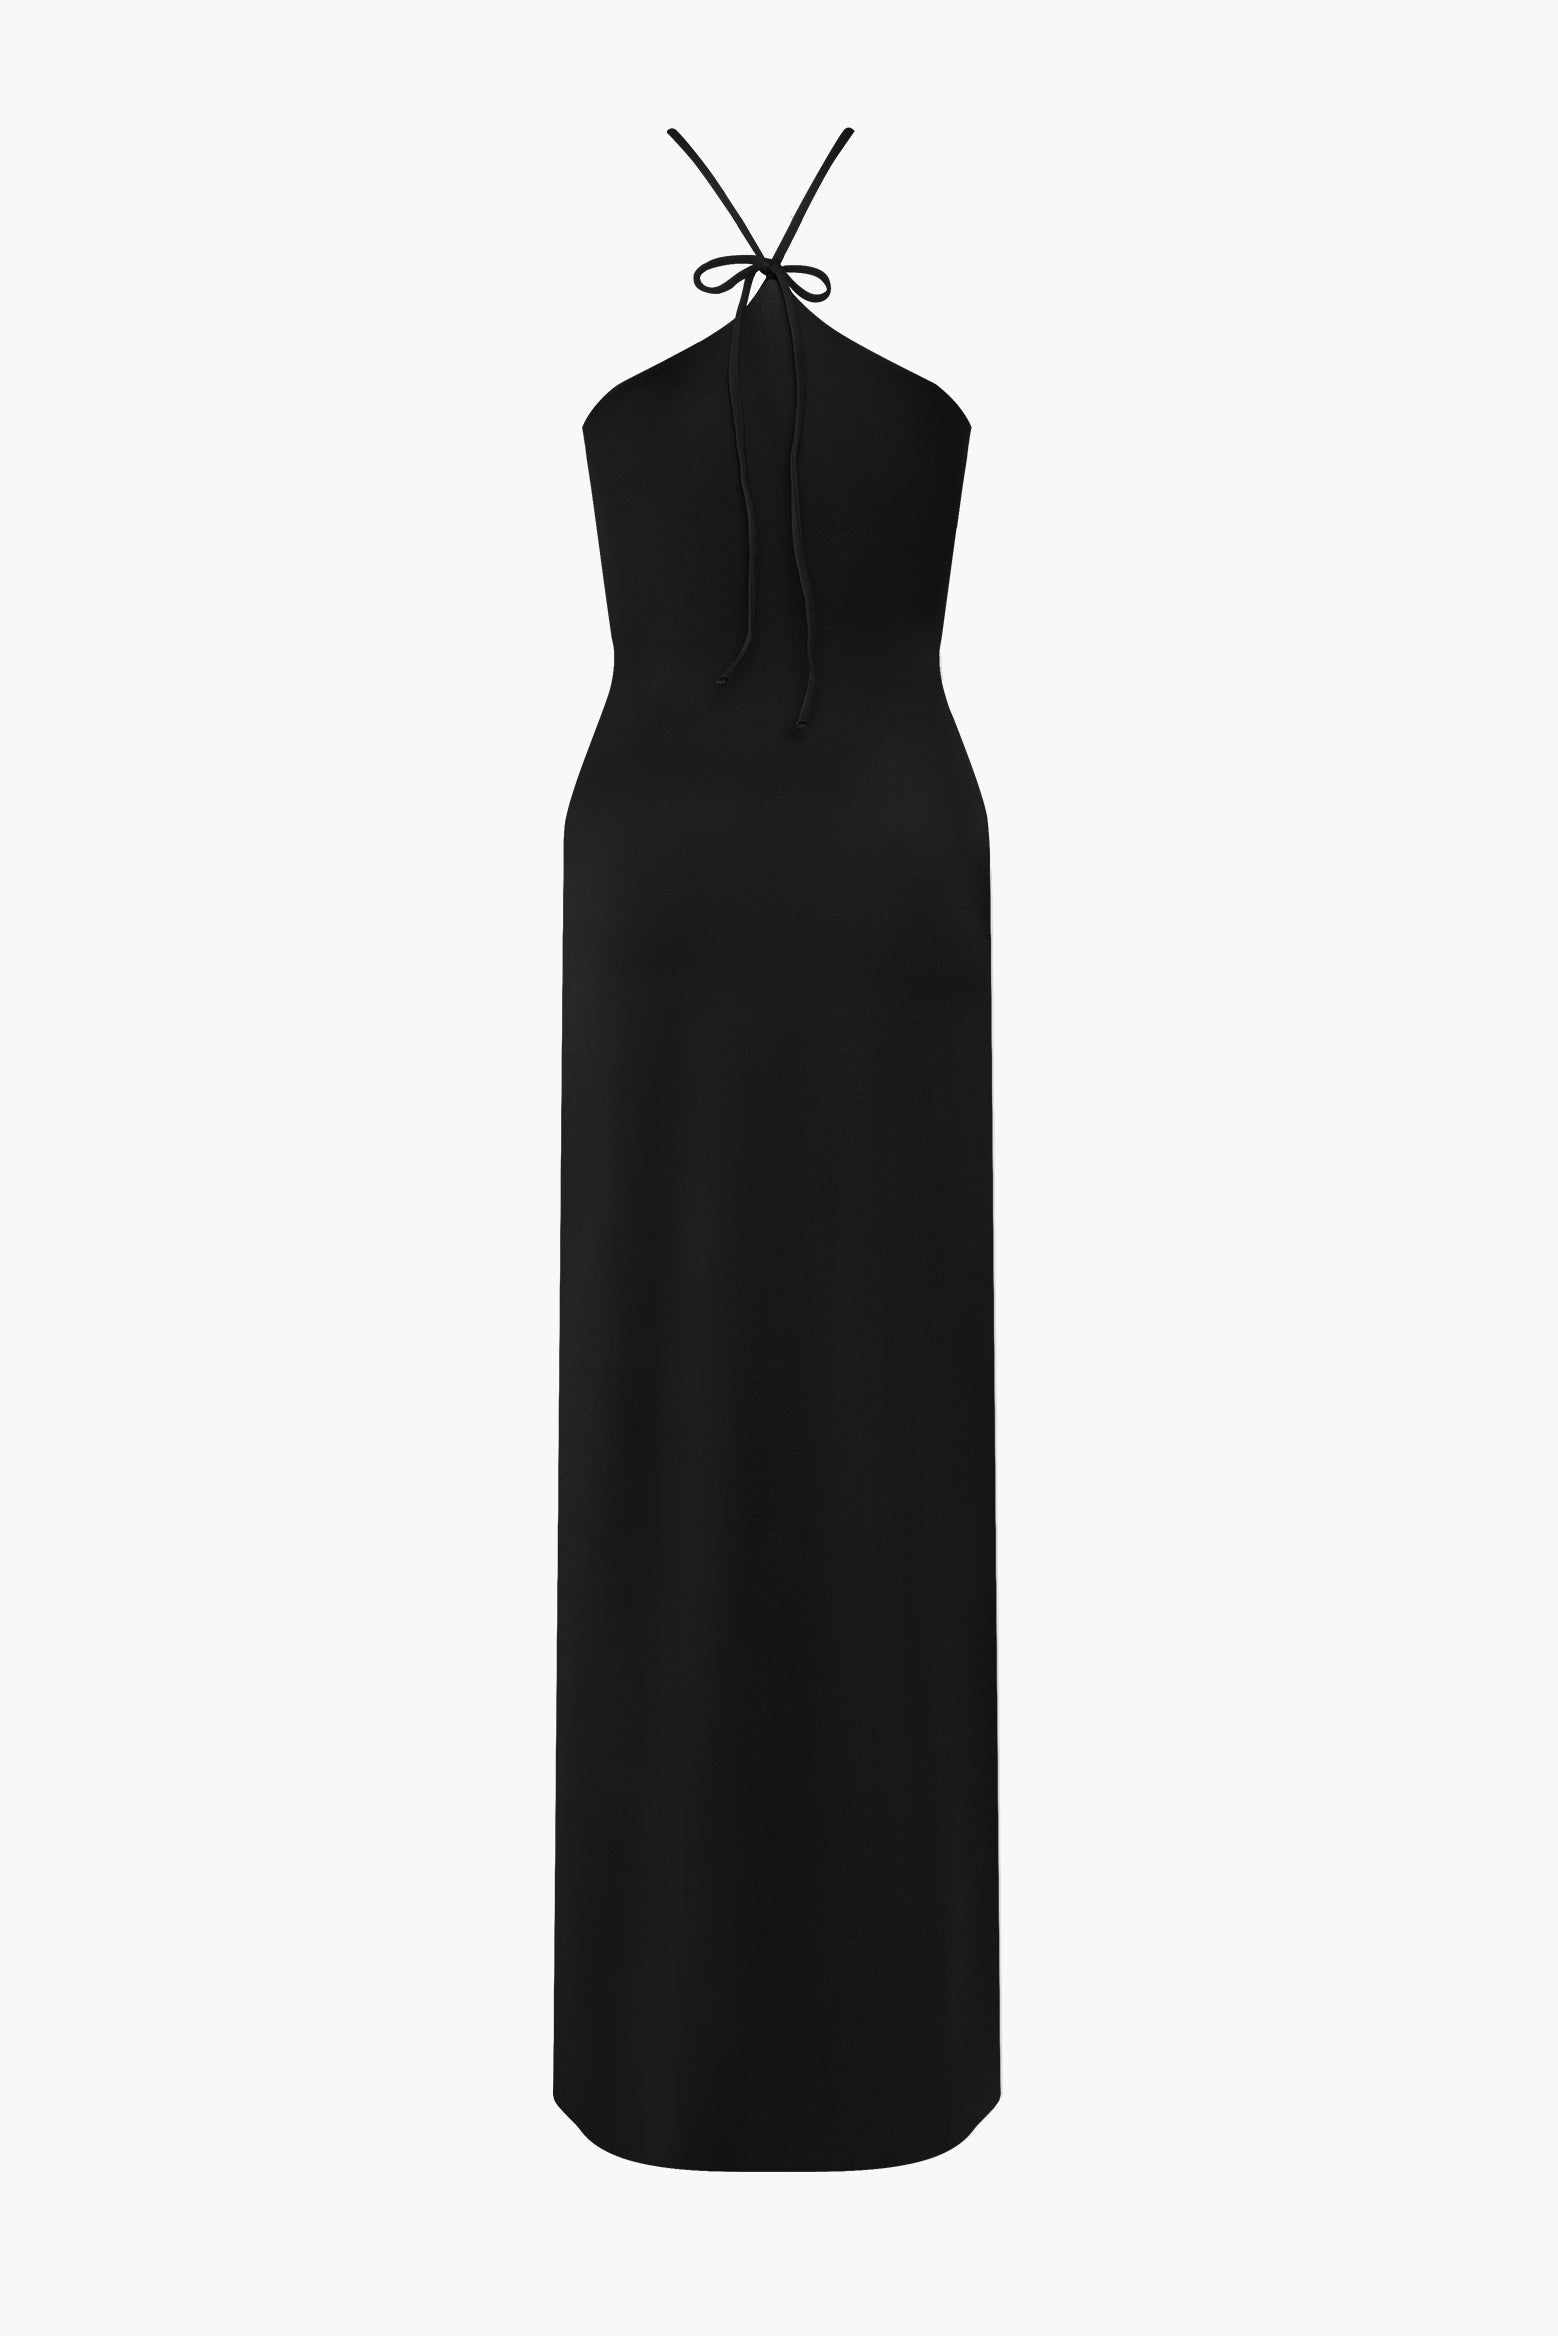 Maygel Coronel Liri Dress in Black available at The New Trend Australia.